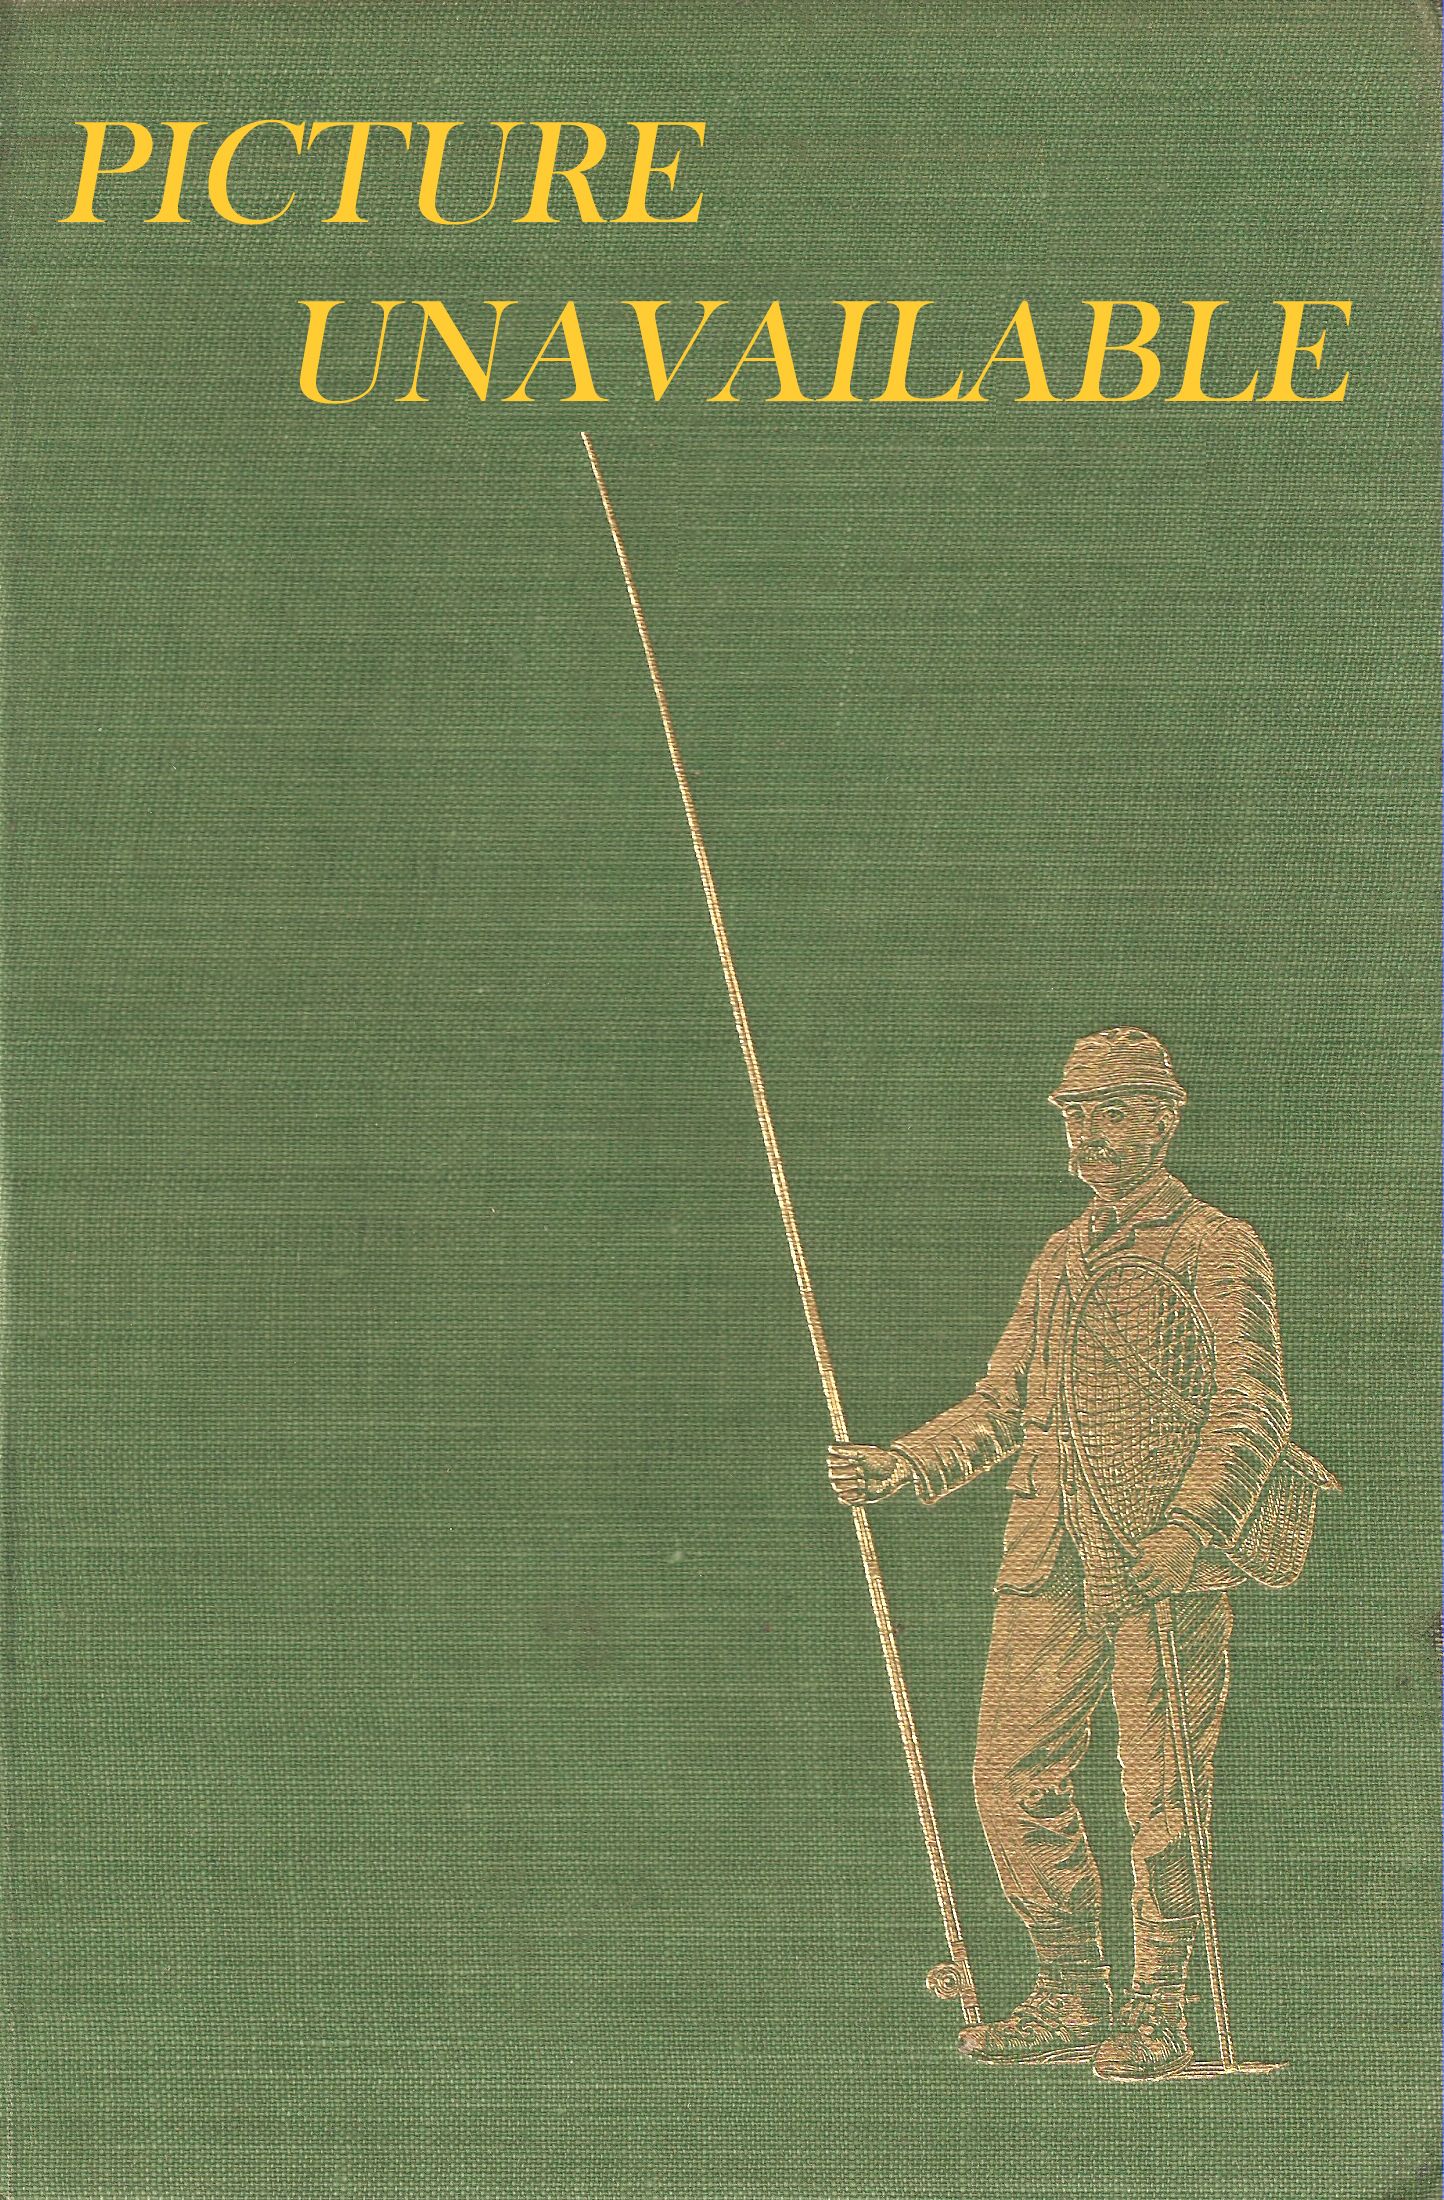 FLY-FISHING FOR COARSE FISH: THEORY and TECHNIQUE. By William J. Howes.  Series editor Kenneth Mansfield.